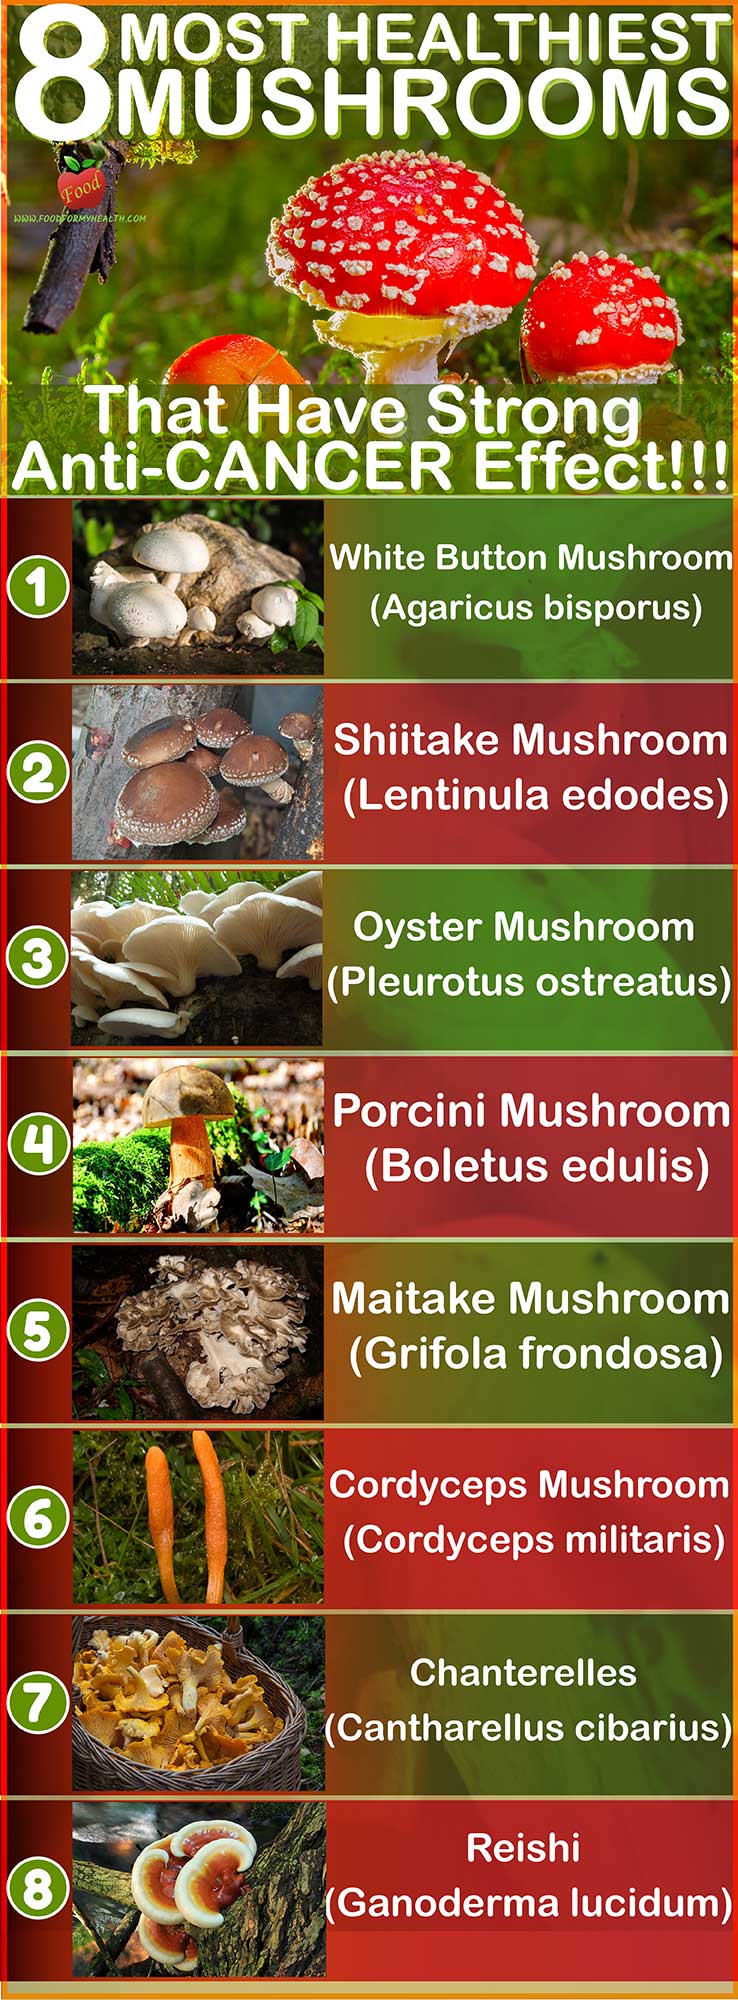 8 most healthiest mushrooms that have strong anti cancer effect